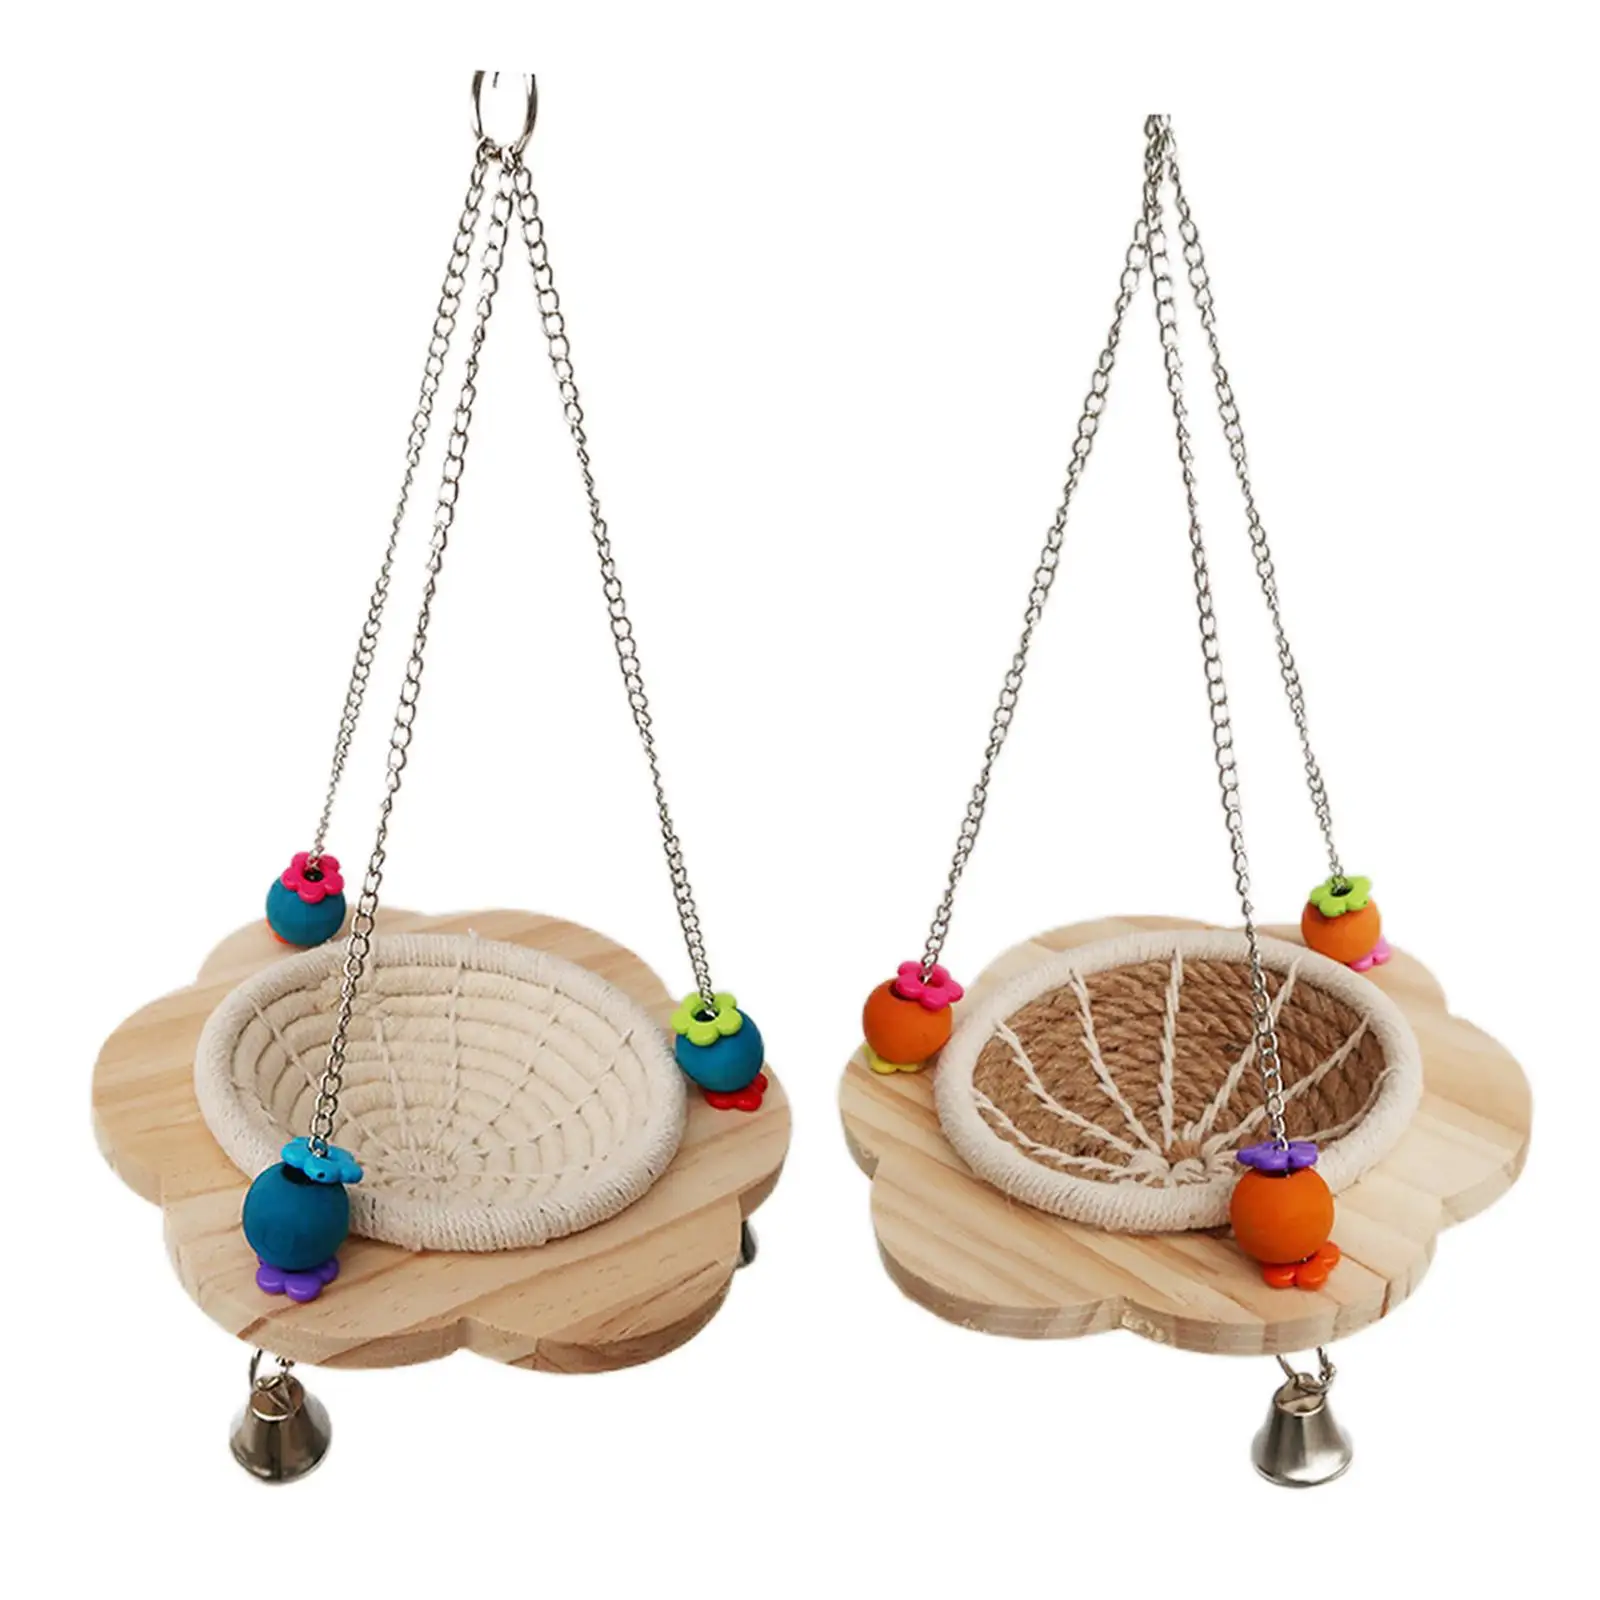 Bird Swing Toy Bird House Cockatiel Macaws Colorful Wooden Finches Parakeet Hanging Toys for Cockatiels Parrot Toy Bird Bell Toy